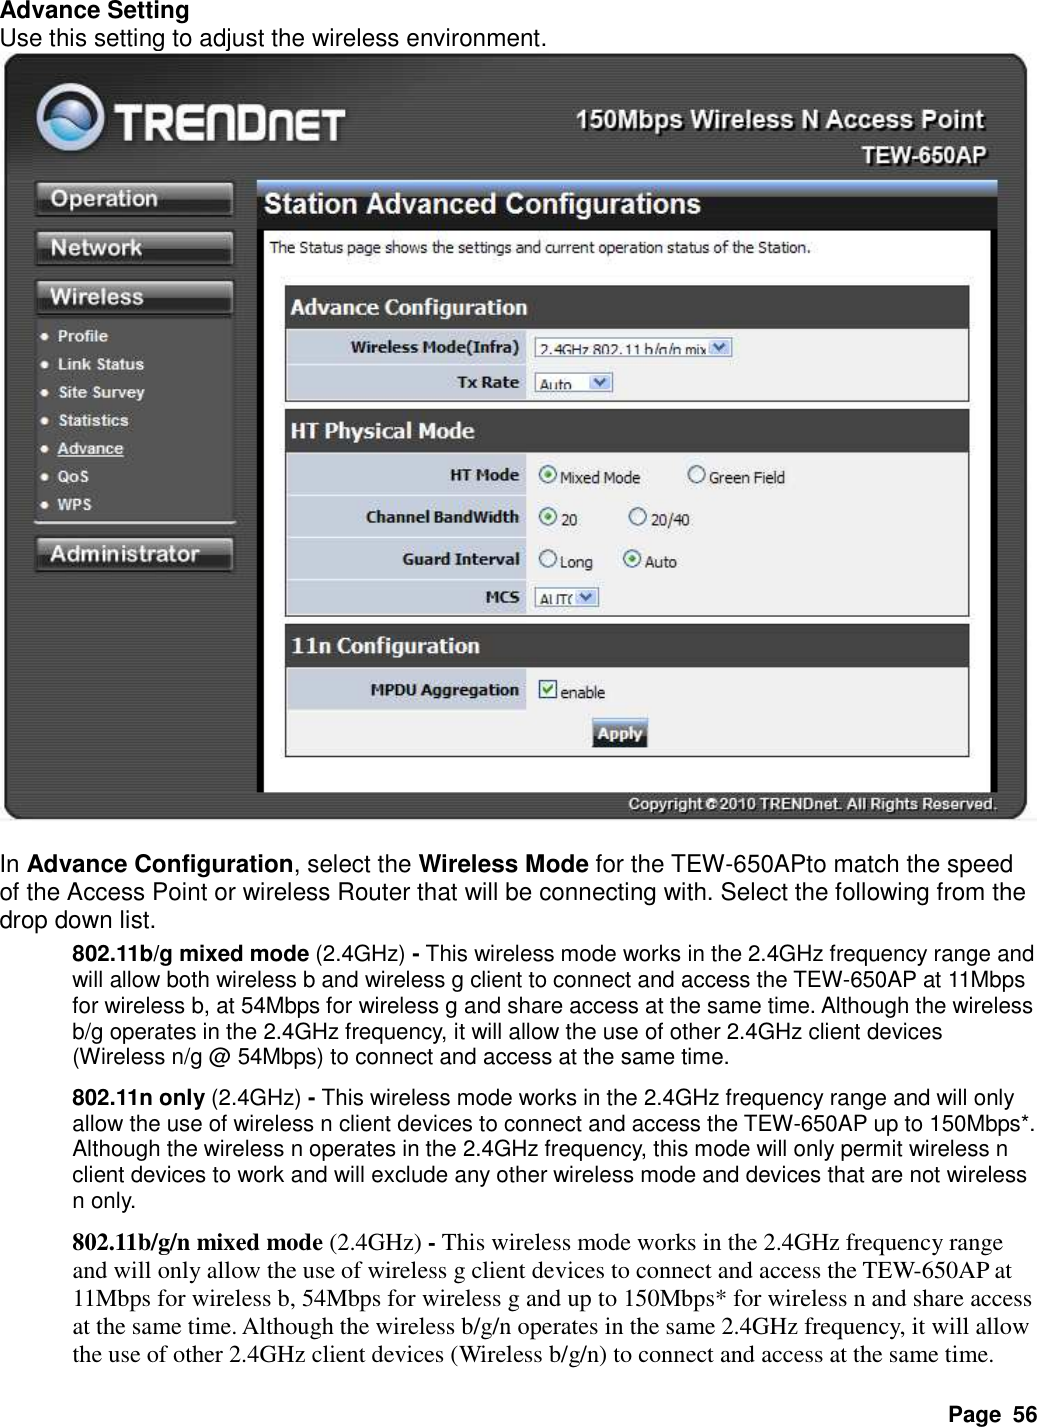 Page  56 Advance Setting Use this setting to adjust the wireless environment.   In Advance Configuration, select the Wireless Mode for the TEW-650APto match the speed of the Access Point or wireless Router that will be connecting with. Select the following from the drop down list. 802.11b/g mixed mode (2.4GHz) - This wireless mode works in the 2.4GHz frequency range and will allow both wireless b and wireless g client to connect and access the TEW-650AP at 11Mbps for wireless b, at 54Mbps for wireless g and share access at the same time. Although the wireless b/g operates in the 2.4GHz frequency, it will allow the use of other 2.4GHz client devices (Wireless n/g @ 54Mbps) to connect and access at the same time. 802.11n only (2.4GHz) - This wireless mode works in the 2.4GHz frequency range and will only allow the use of wireless n client devices to connect and access the TEW-650AP up to 150Mbps*. Although the wireless n operates in the 2.4GHz frequency, this mode will only permit wireless n client devices to work and will exclude any other wireless mode and devices that are not wireless n only. 802.11b/g/n mixed mode (2.4GHz) - This wireless mode works in the 2.4GHz frequency range and will only allow the use of wireless g client devices to connect and access the TEW-650AP at 11Mbps for wireless b, 54Mbps for wireless g and up to 150Mbps* for wireless n and share access at the same time. Although the wireless b/g/n operates in the same 2.4GHz frequency, it will allow the use of other 2.4GHz client devices (Wireless b/g/n) to connect and access at the same time. 